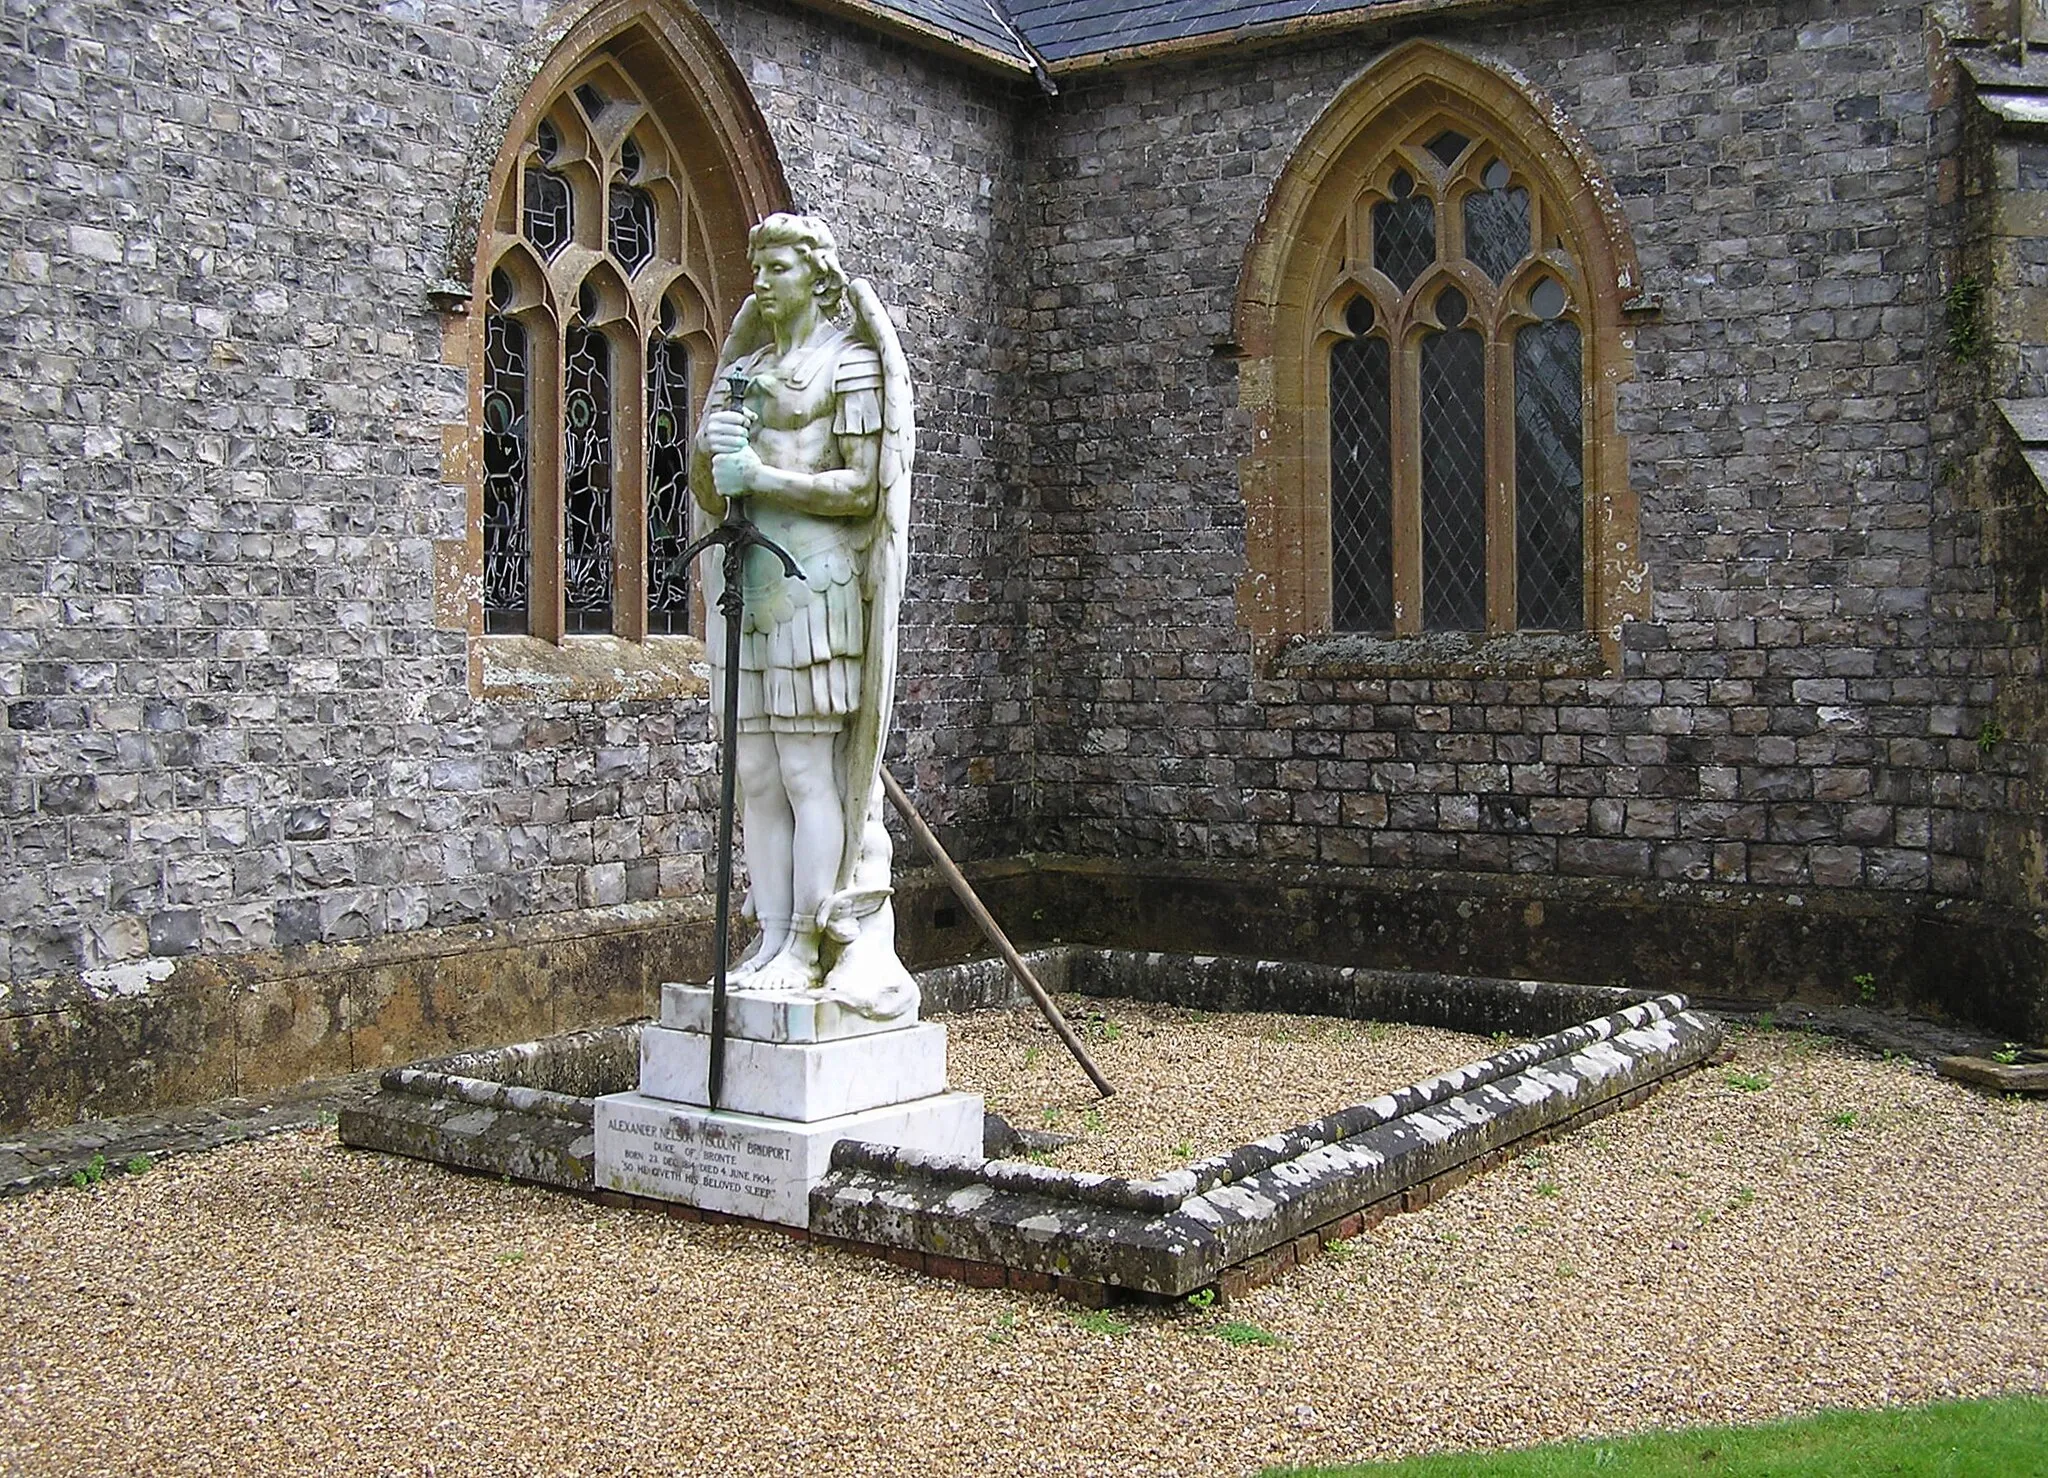 Photo showing: White marble monument to Alexander Nelson Hood, 4th Duke of Bronte, at the Parish Church of Saint Thomas, in Cricket Saint Thomas, Somerset, England. Note that this church is (as of 2008) inside the Warner Breaks Holiday Village complex, but the public are free to visit it. 
The inscription says: Here rests Alexander Nelson Viscount Bridport. Duke of Bronte
Born 23 Dec 1814. Died 4 June 1904. So he giveth his beloved sleep.
Taken by Adrian Pingstone in July 2007 and placed in the public domain.